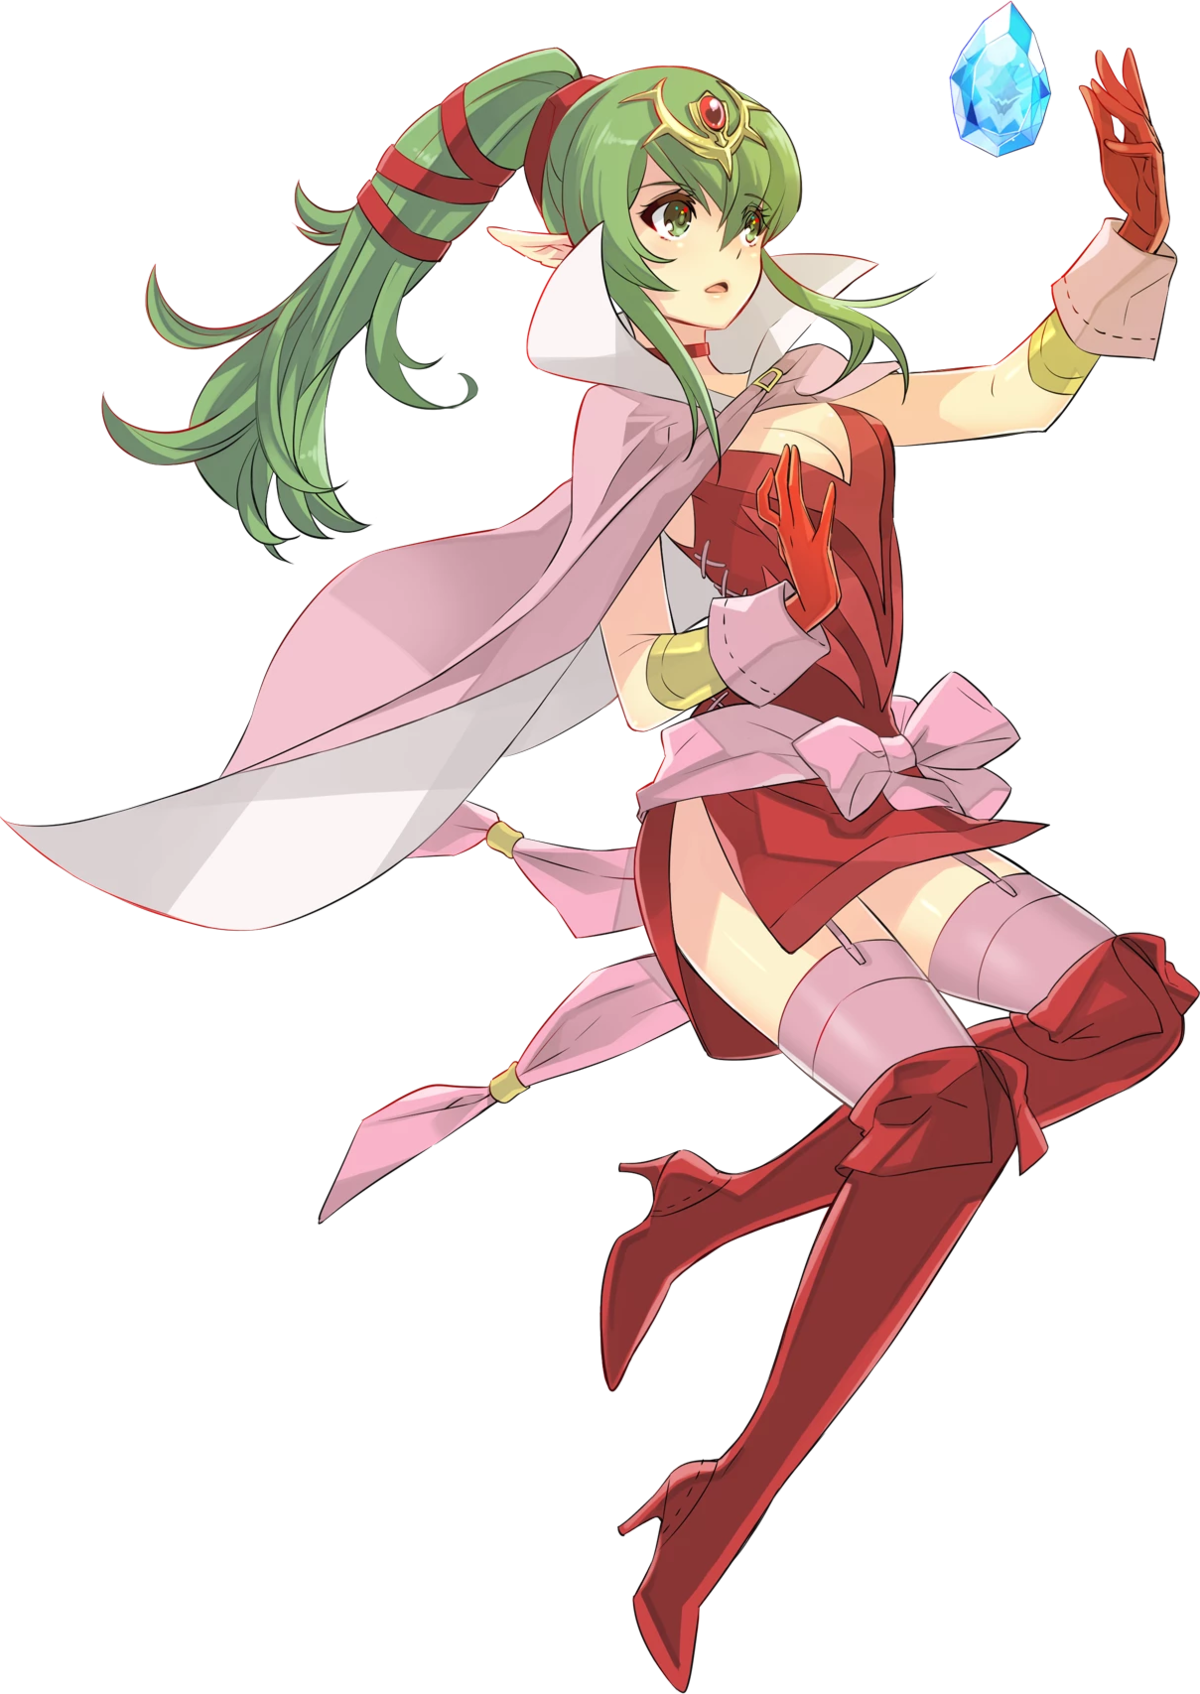 Tiki is a recurring character in the Fire Emblem series. 